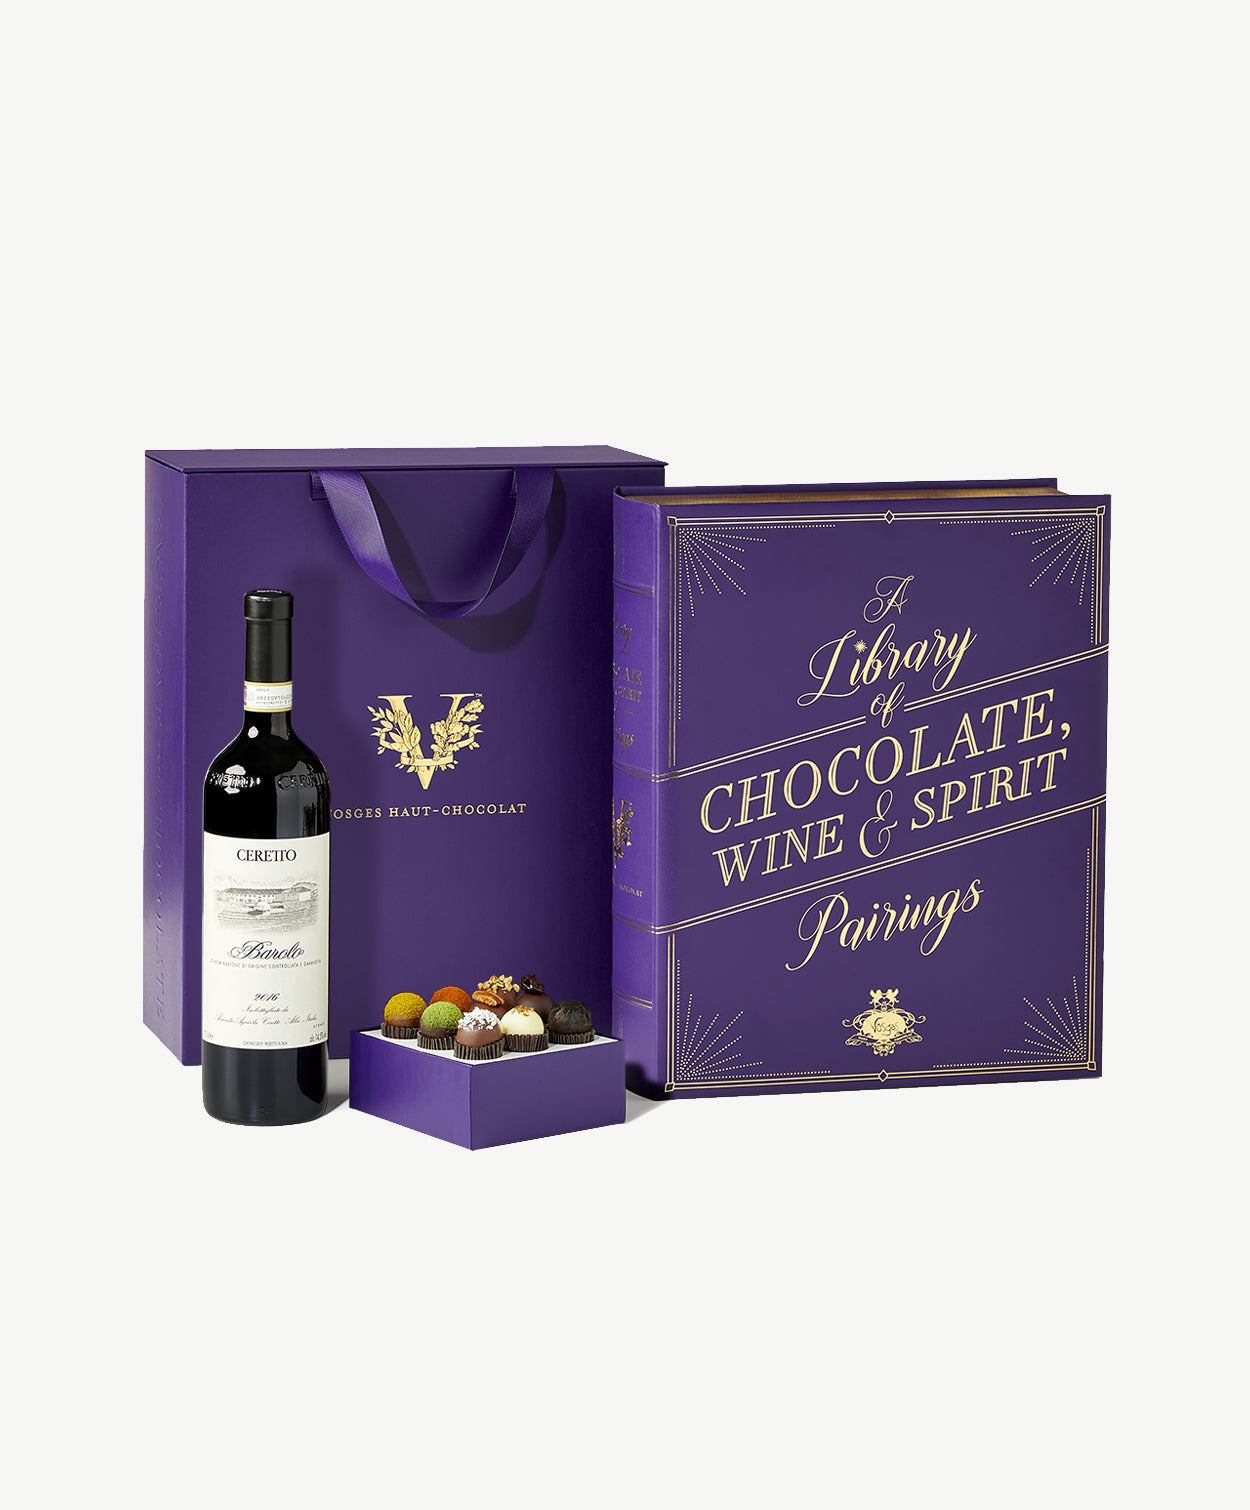 A bottle of Ceretto red wine and an opened box of brightly decorated chocolate truffles sit beside a large purple candy box reading, "Chocolate, Wine & Spirit" on a grey background.